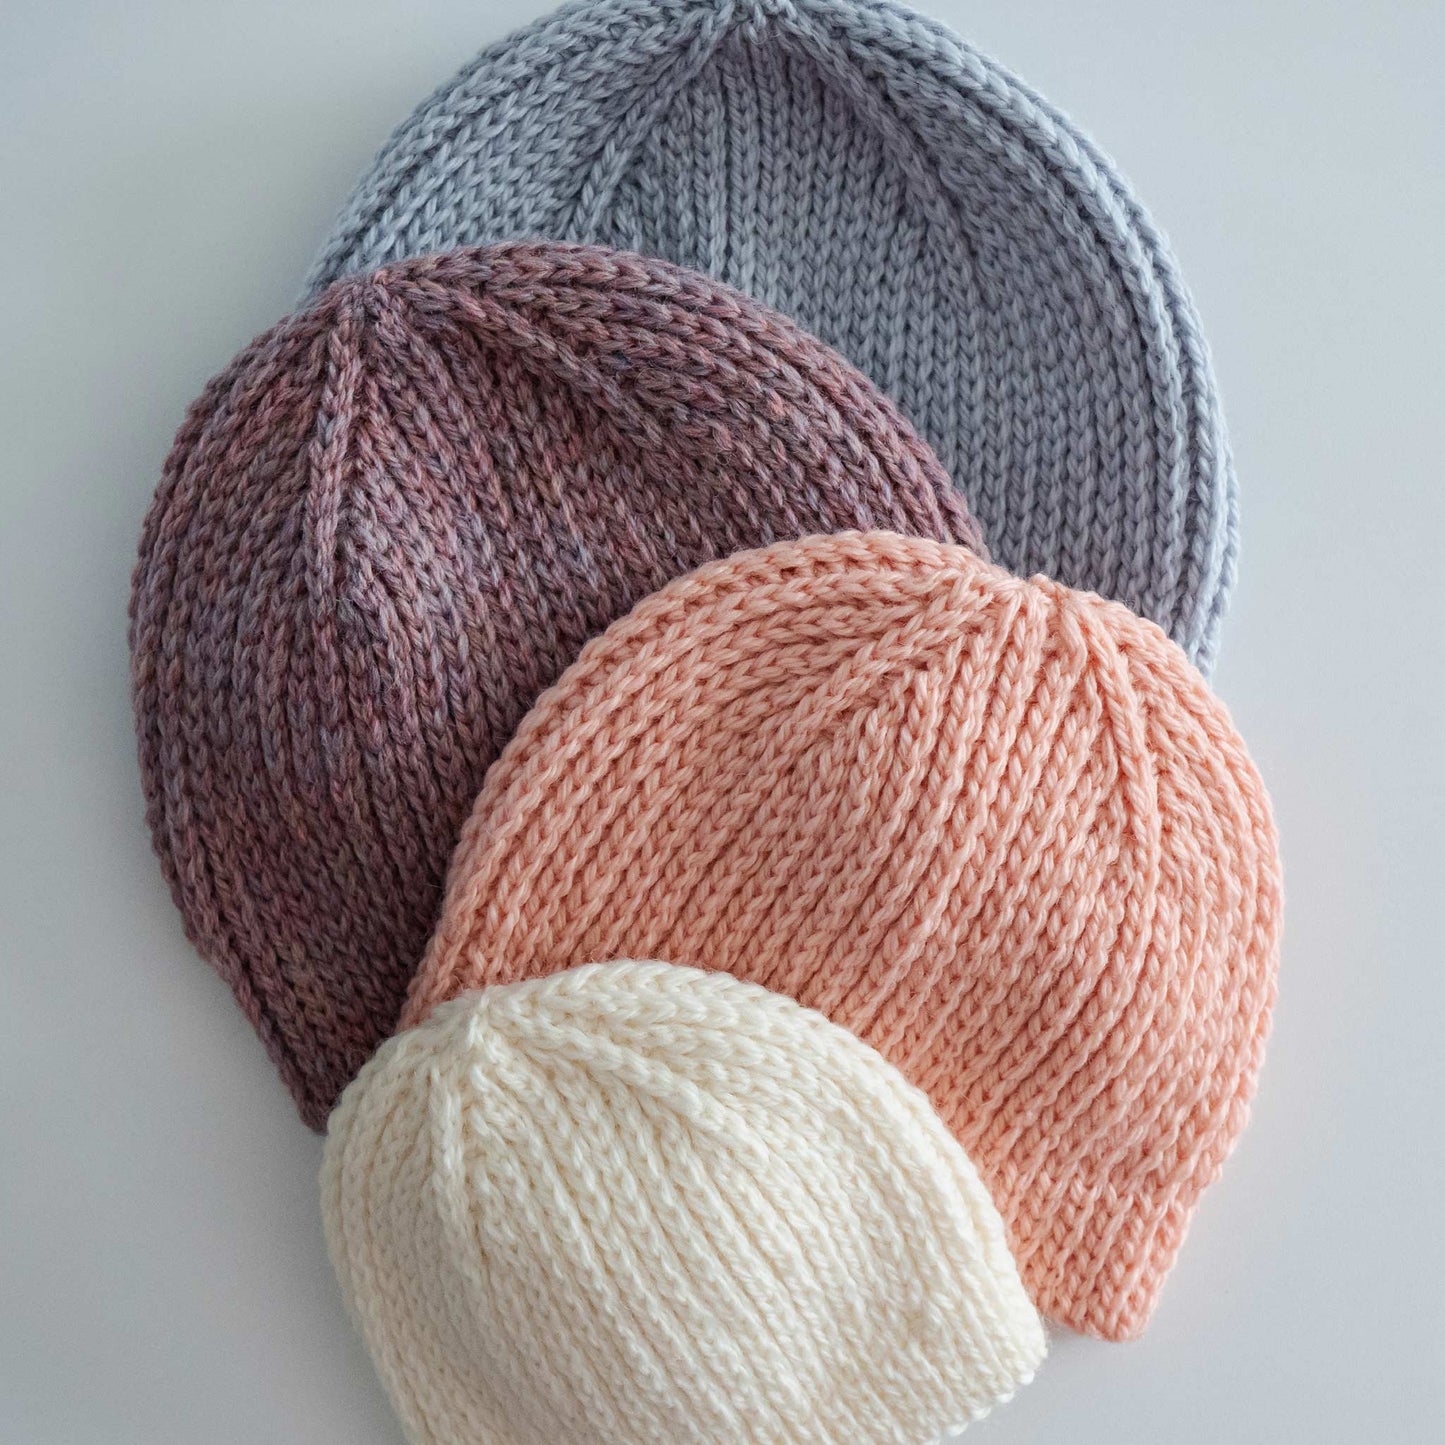 Perfect Crown Crochet Hat In Rows PDF